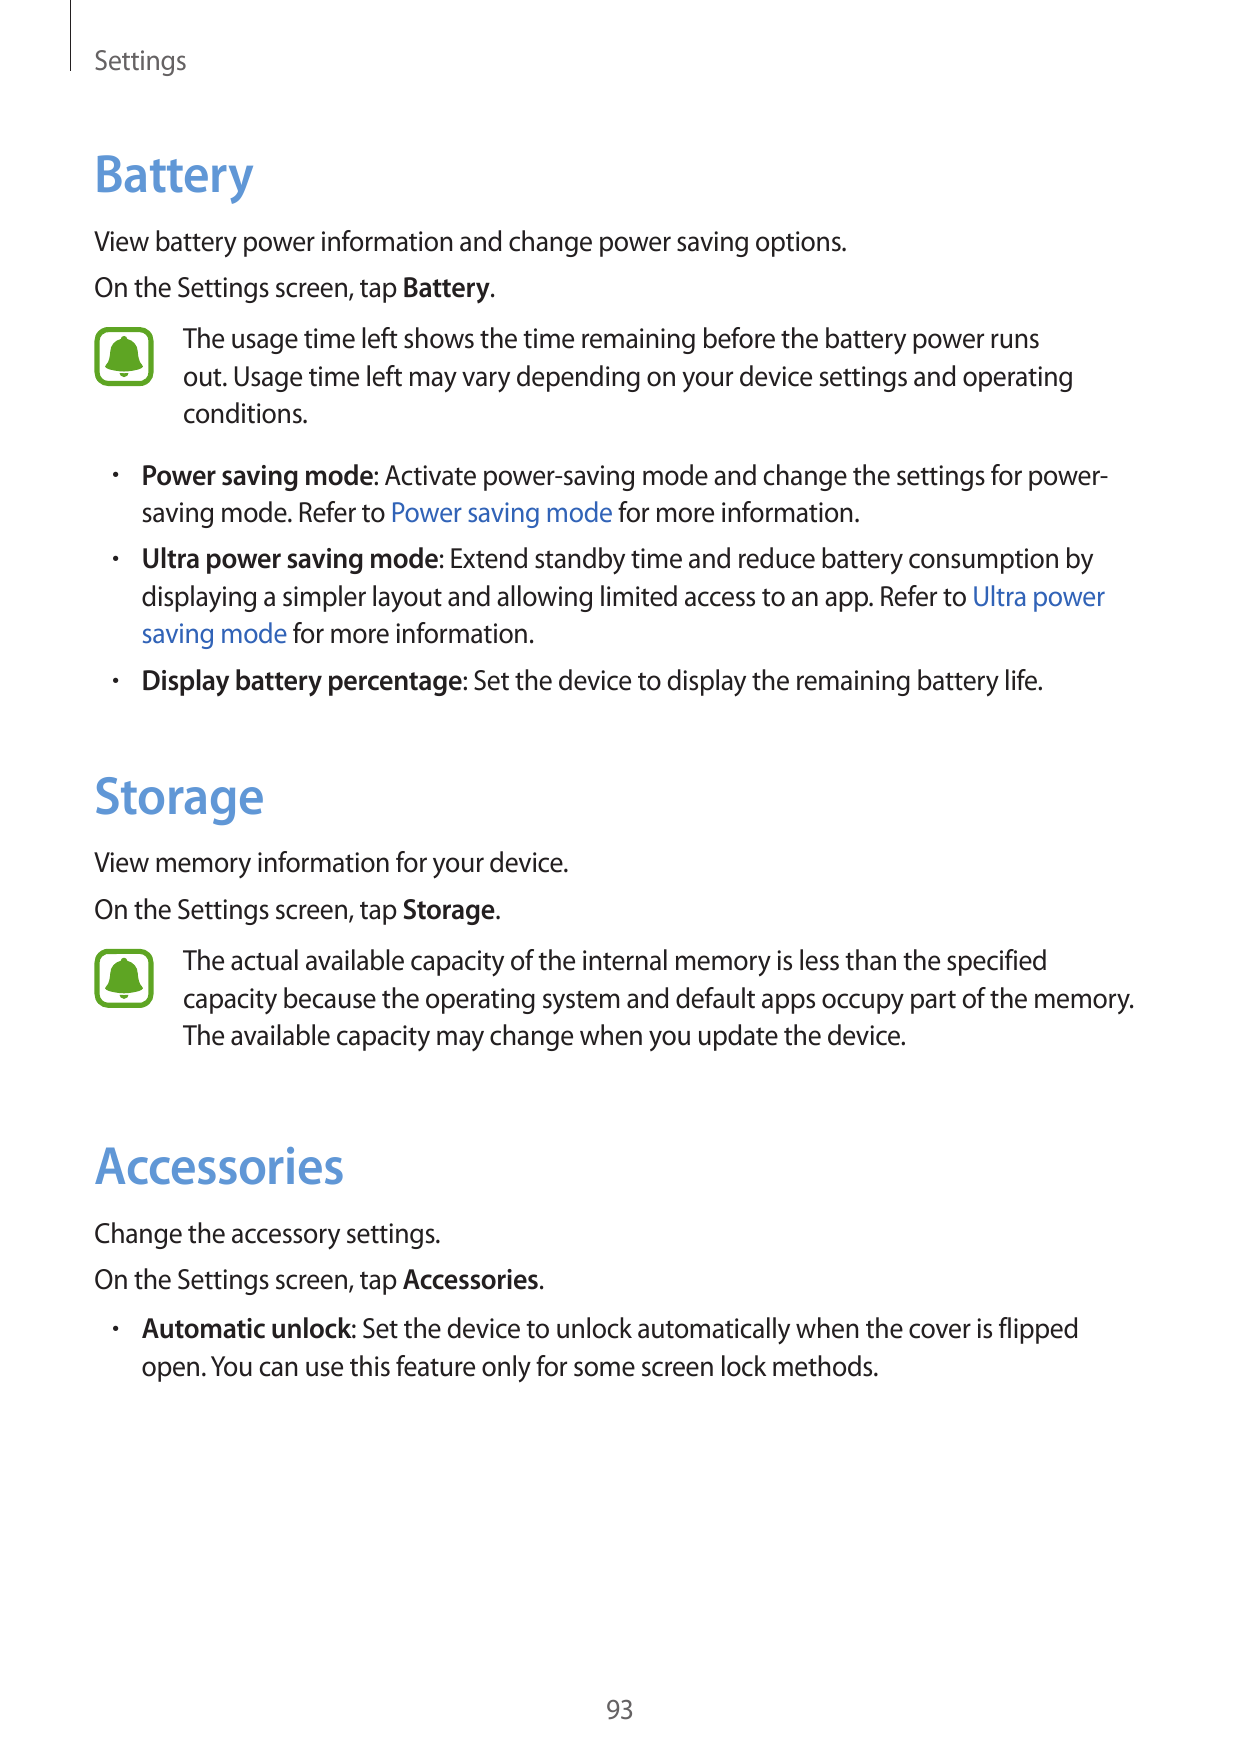 SettingsBatteryView battery power information and change power saving options.On the Settings screen, tap Battery.The usage time